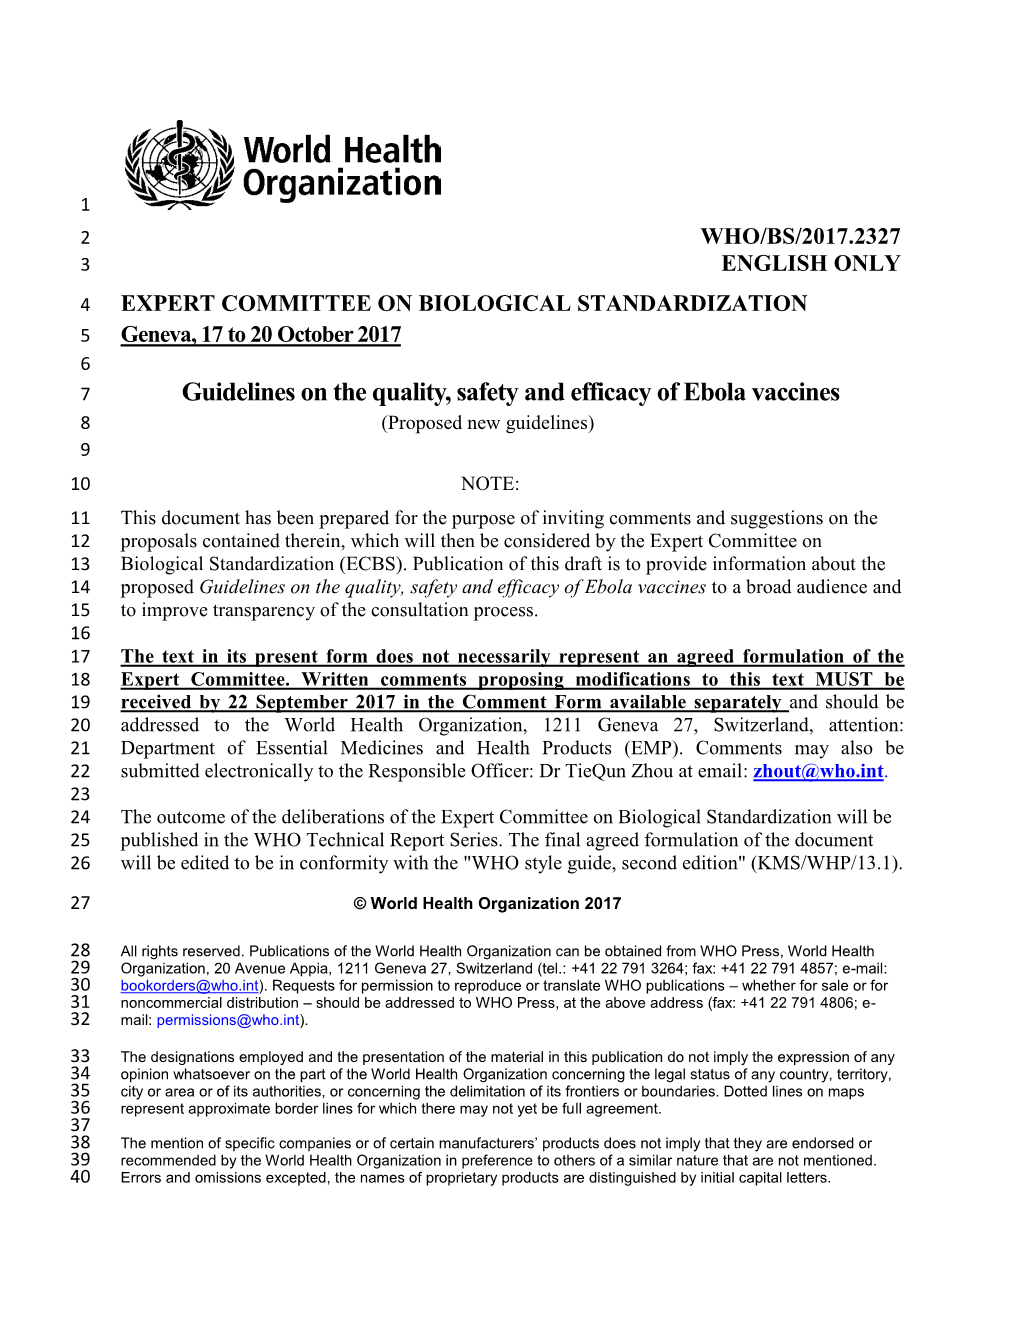 Guidelines on the Quality, Safety and Efficacy of Ebola Vaccines